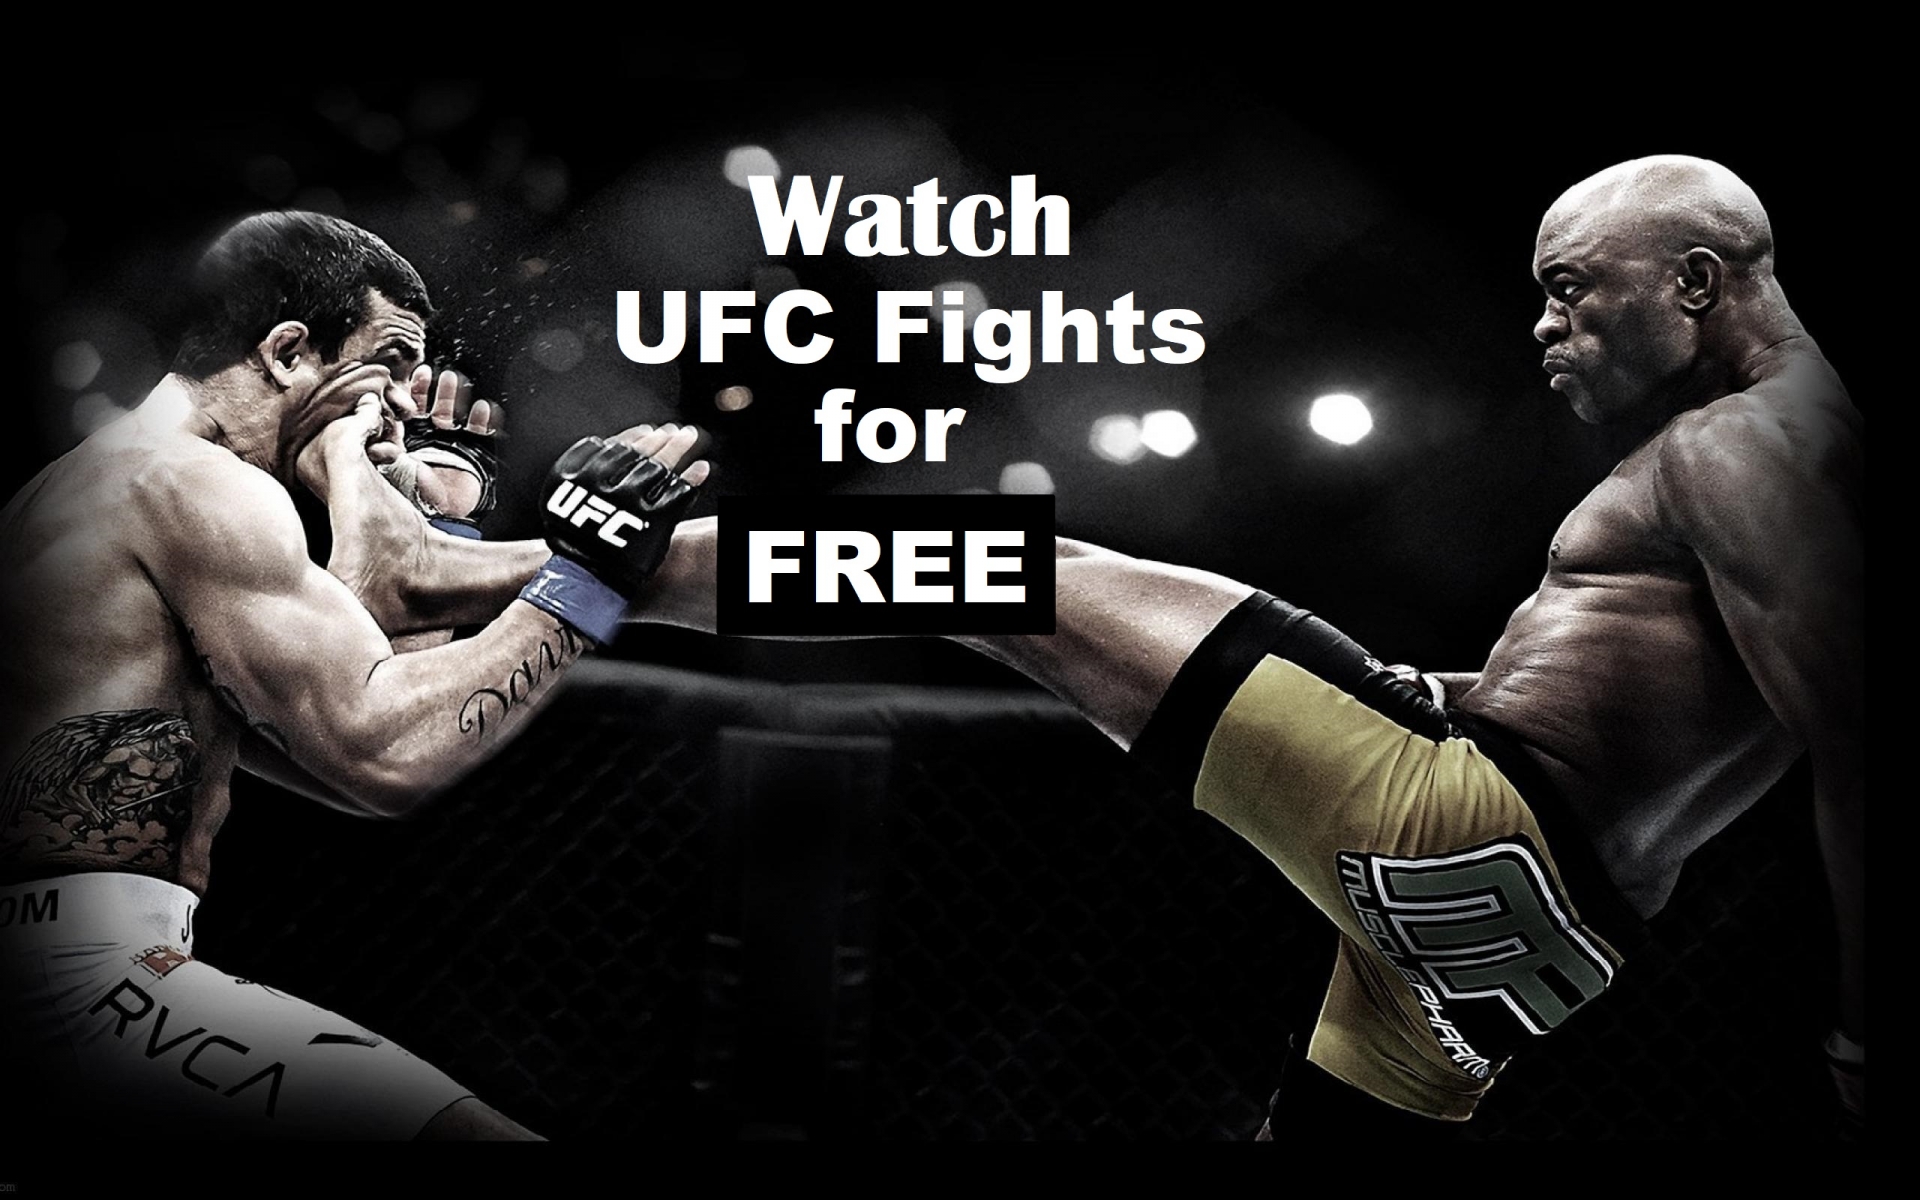 Where can I watch live UFC matches on the internet?